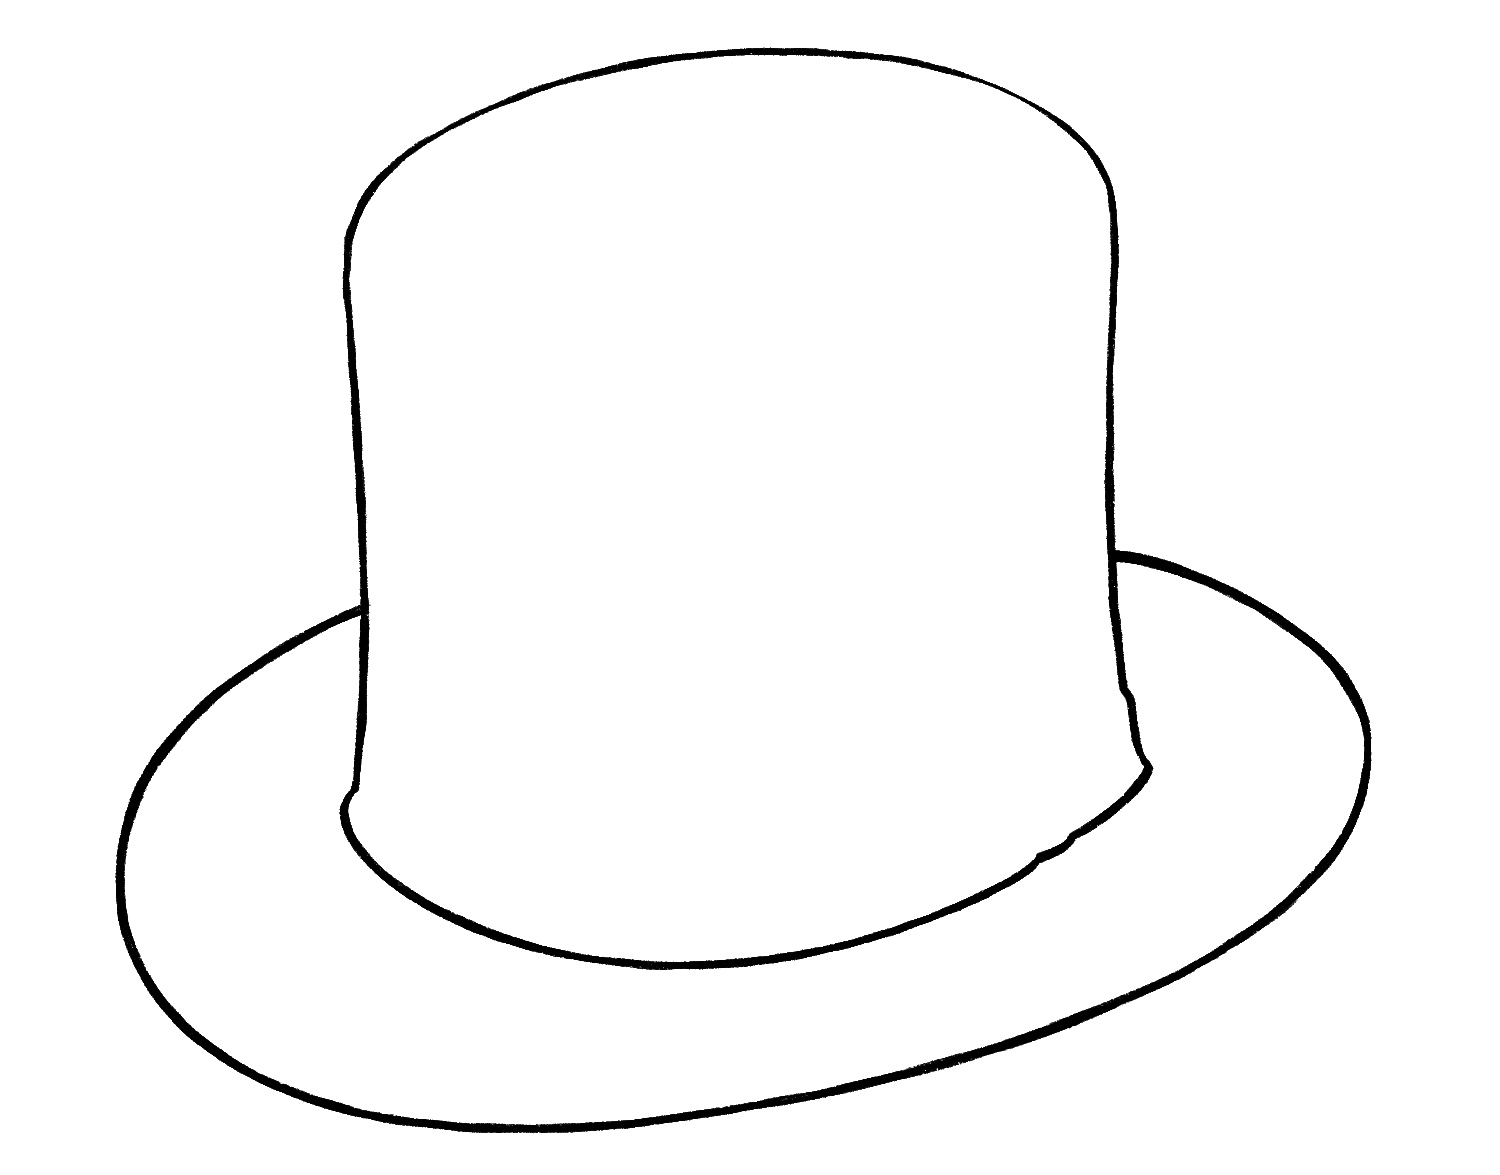 How to Draw Wooden Hat (Hats) Step by Step | DrawingTutorials101.com